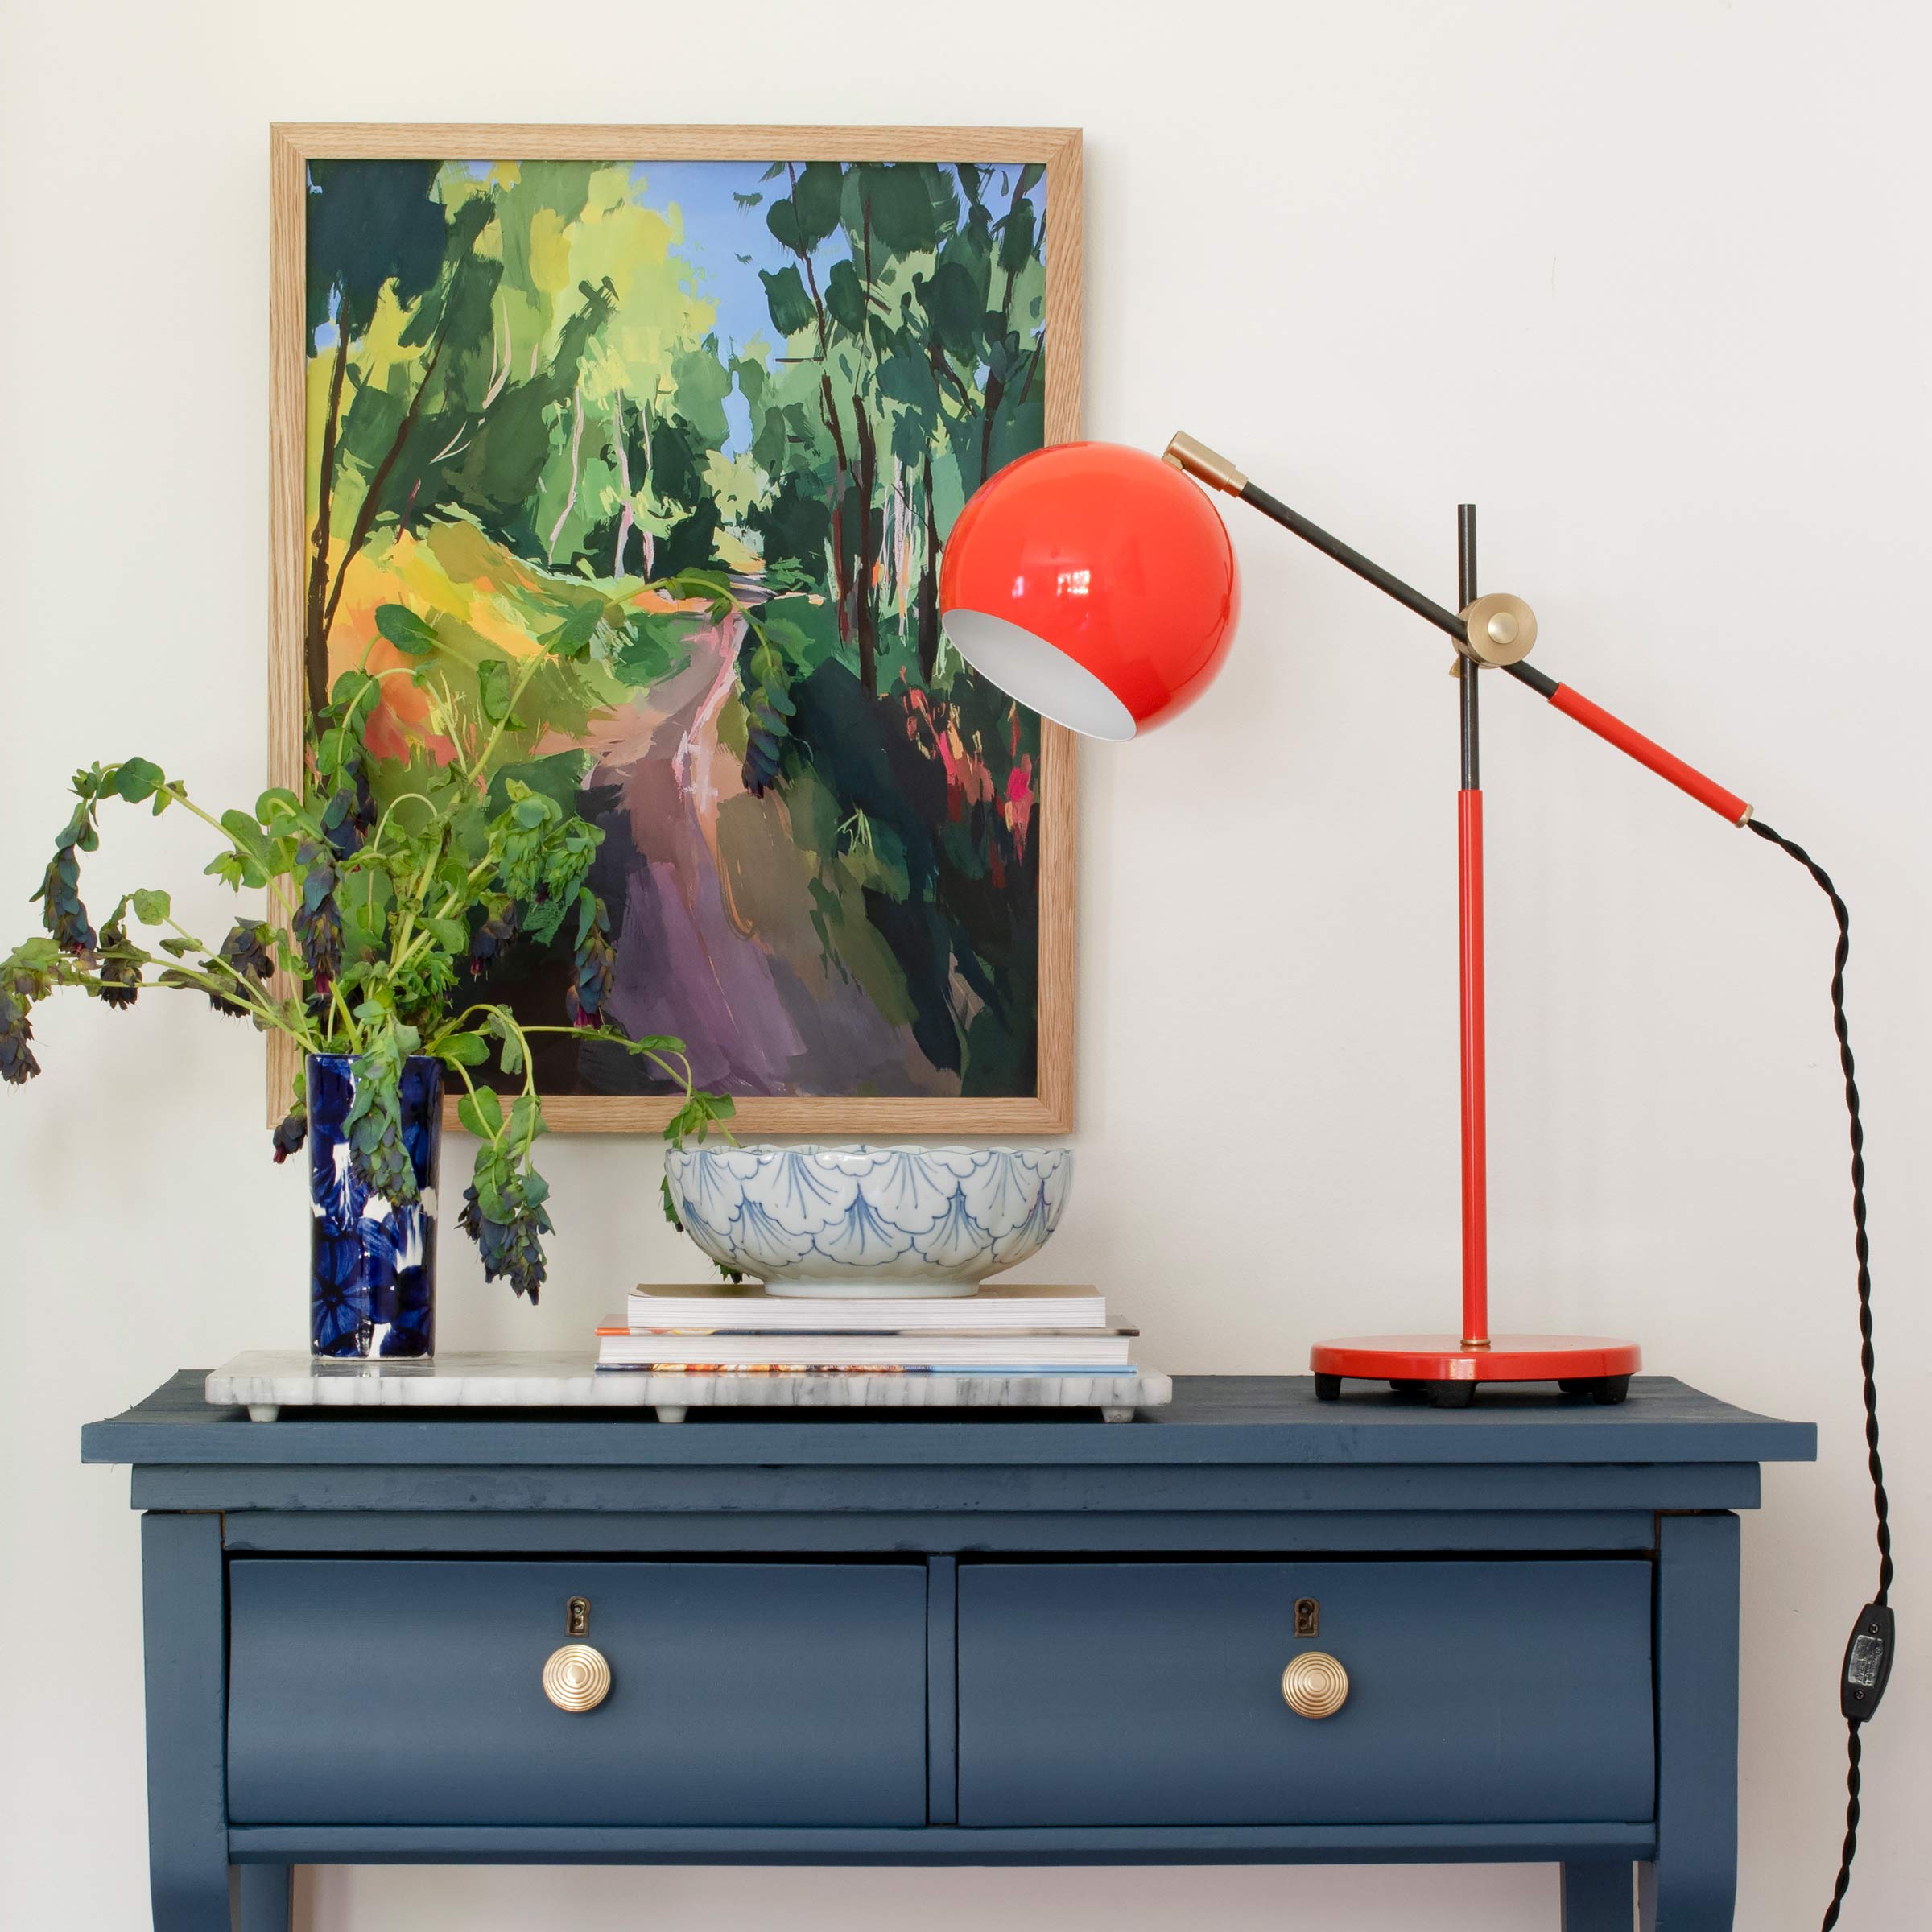 Original framed art above a blue side table with a bowl, vase, and red lamp on top.